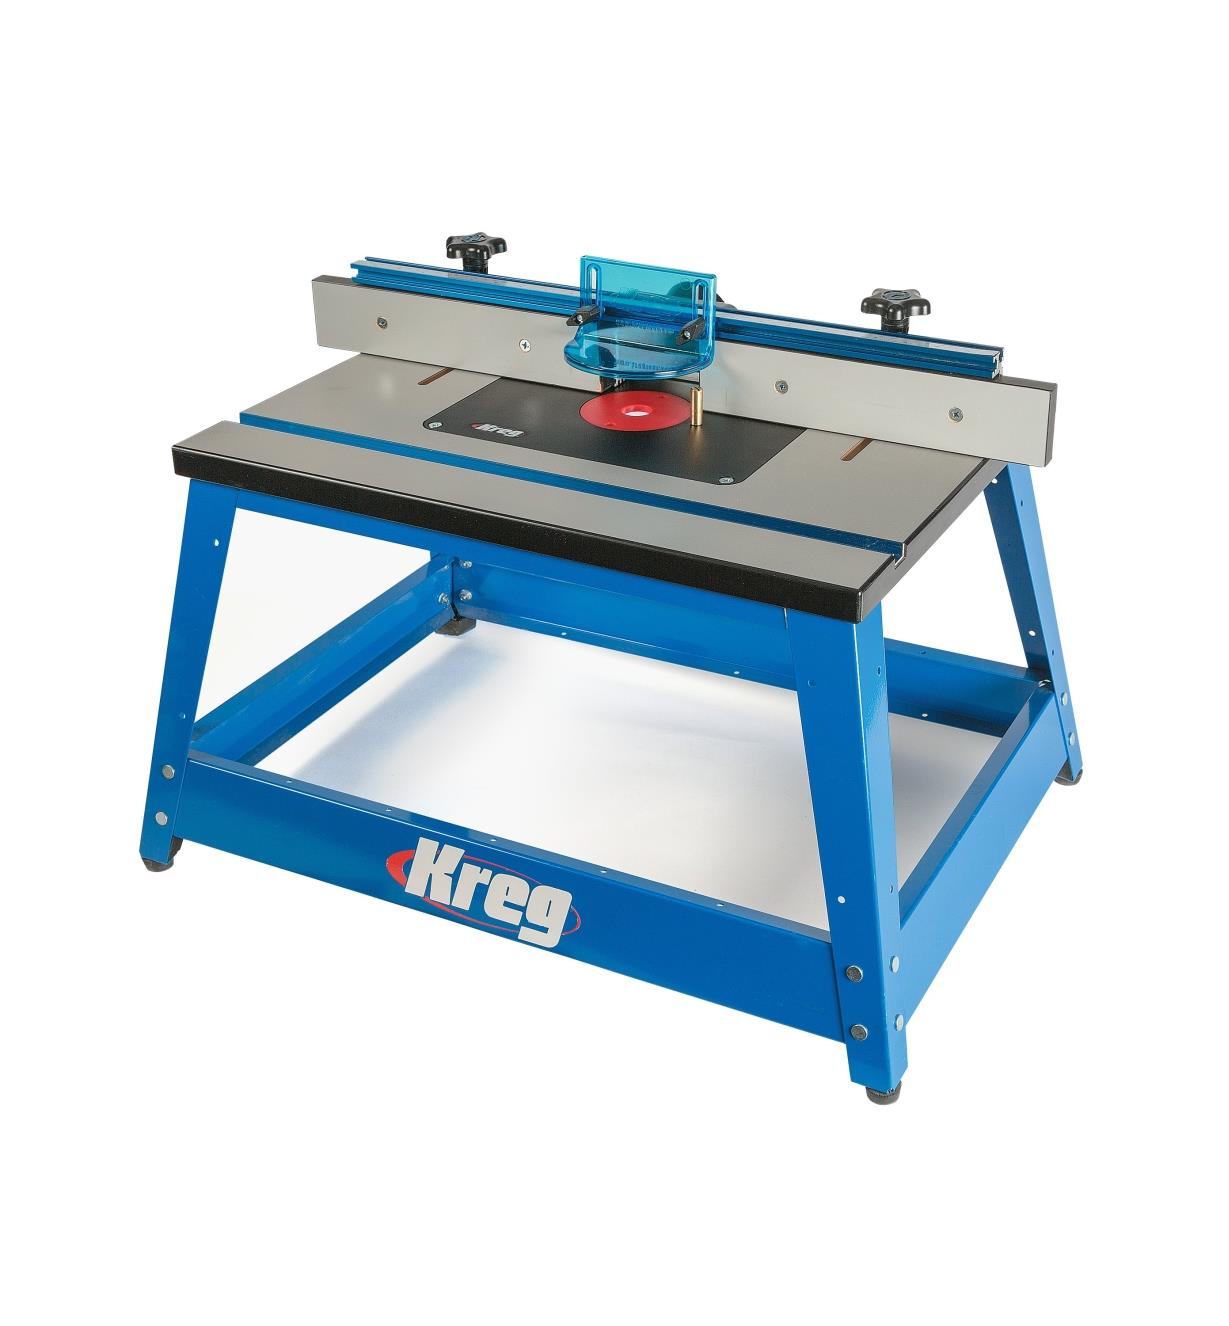 86N4030 - Kreg Bench-Top Router Table